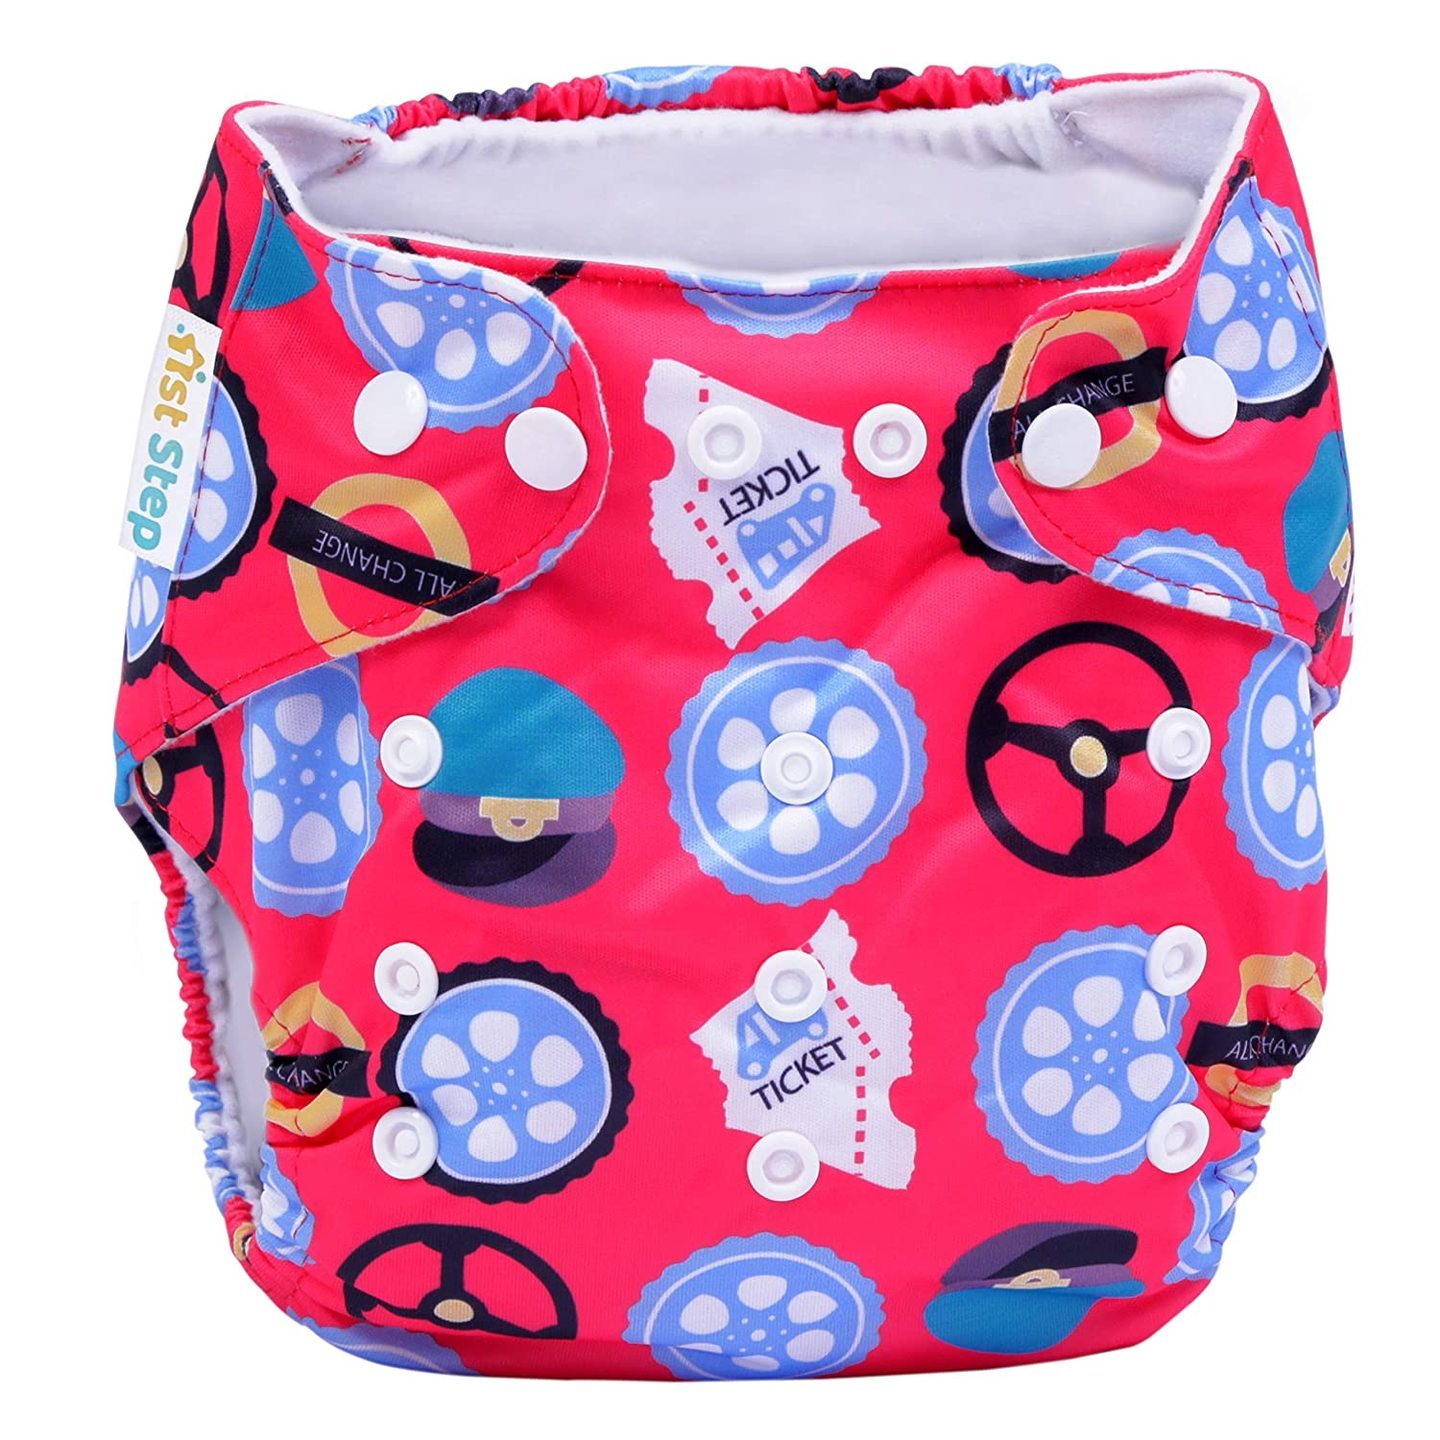 Cloth Diaper Free size, Adjustable, Washable and Reusable Diaper with Diaper Liner Wheels